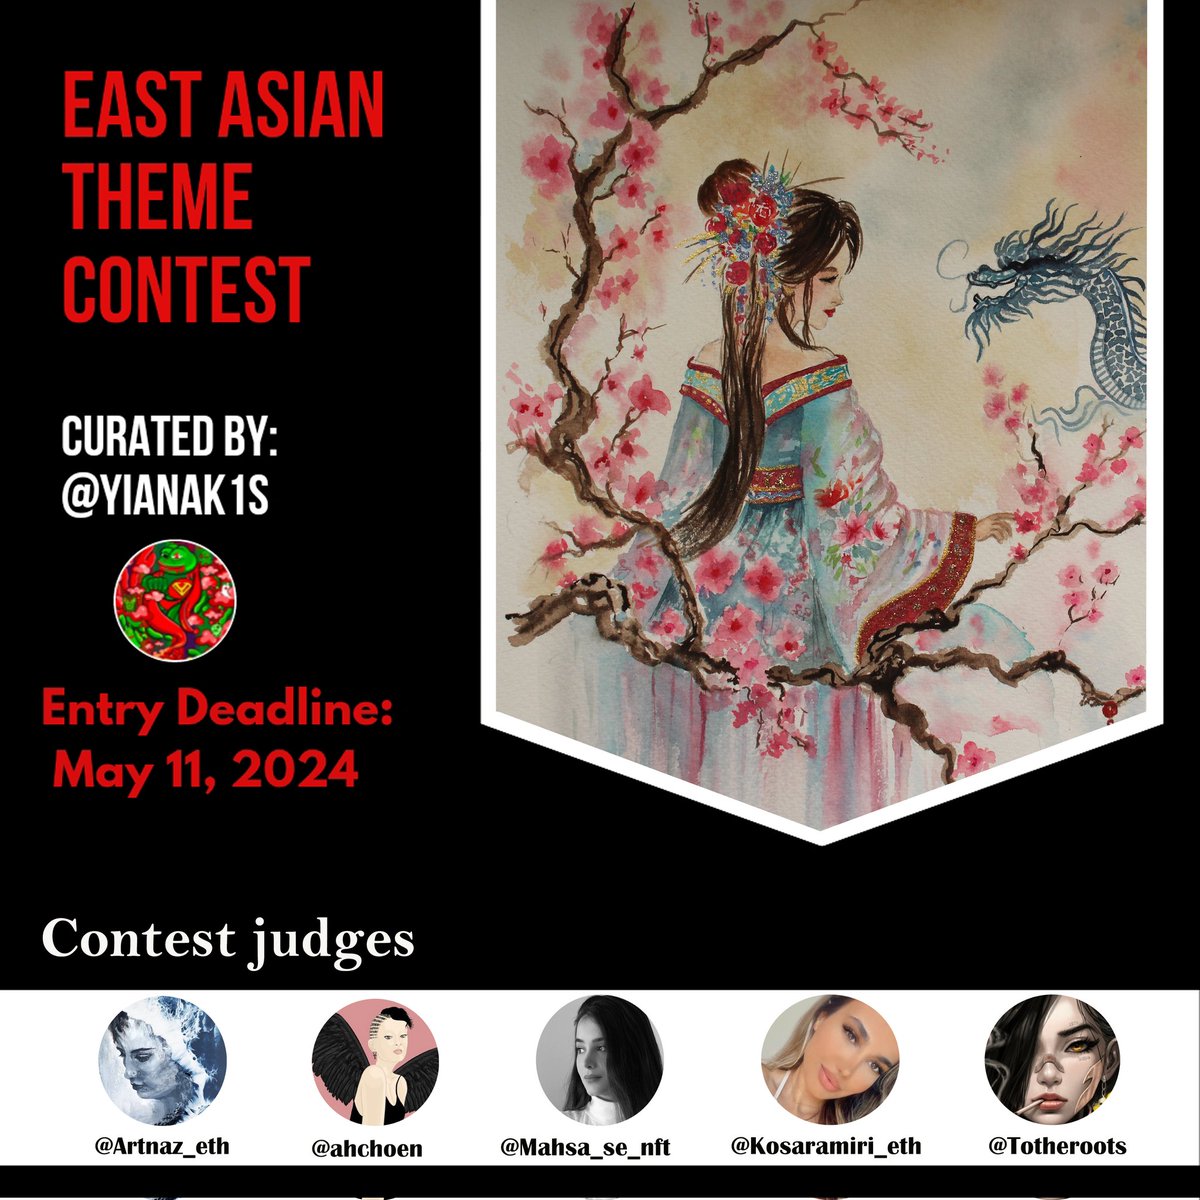 💥JUST 2️⃣ DAYS LEFT 💥 If you hadn't share your piece with 'East Asian Style Theme ' Share with hashtag #yang0sEastAsiaArt Under main post 👇 Amazing appourtunity curated by @yianak1s 🔥 💥At 11 may comments will be close